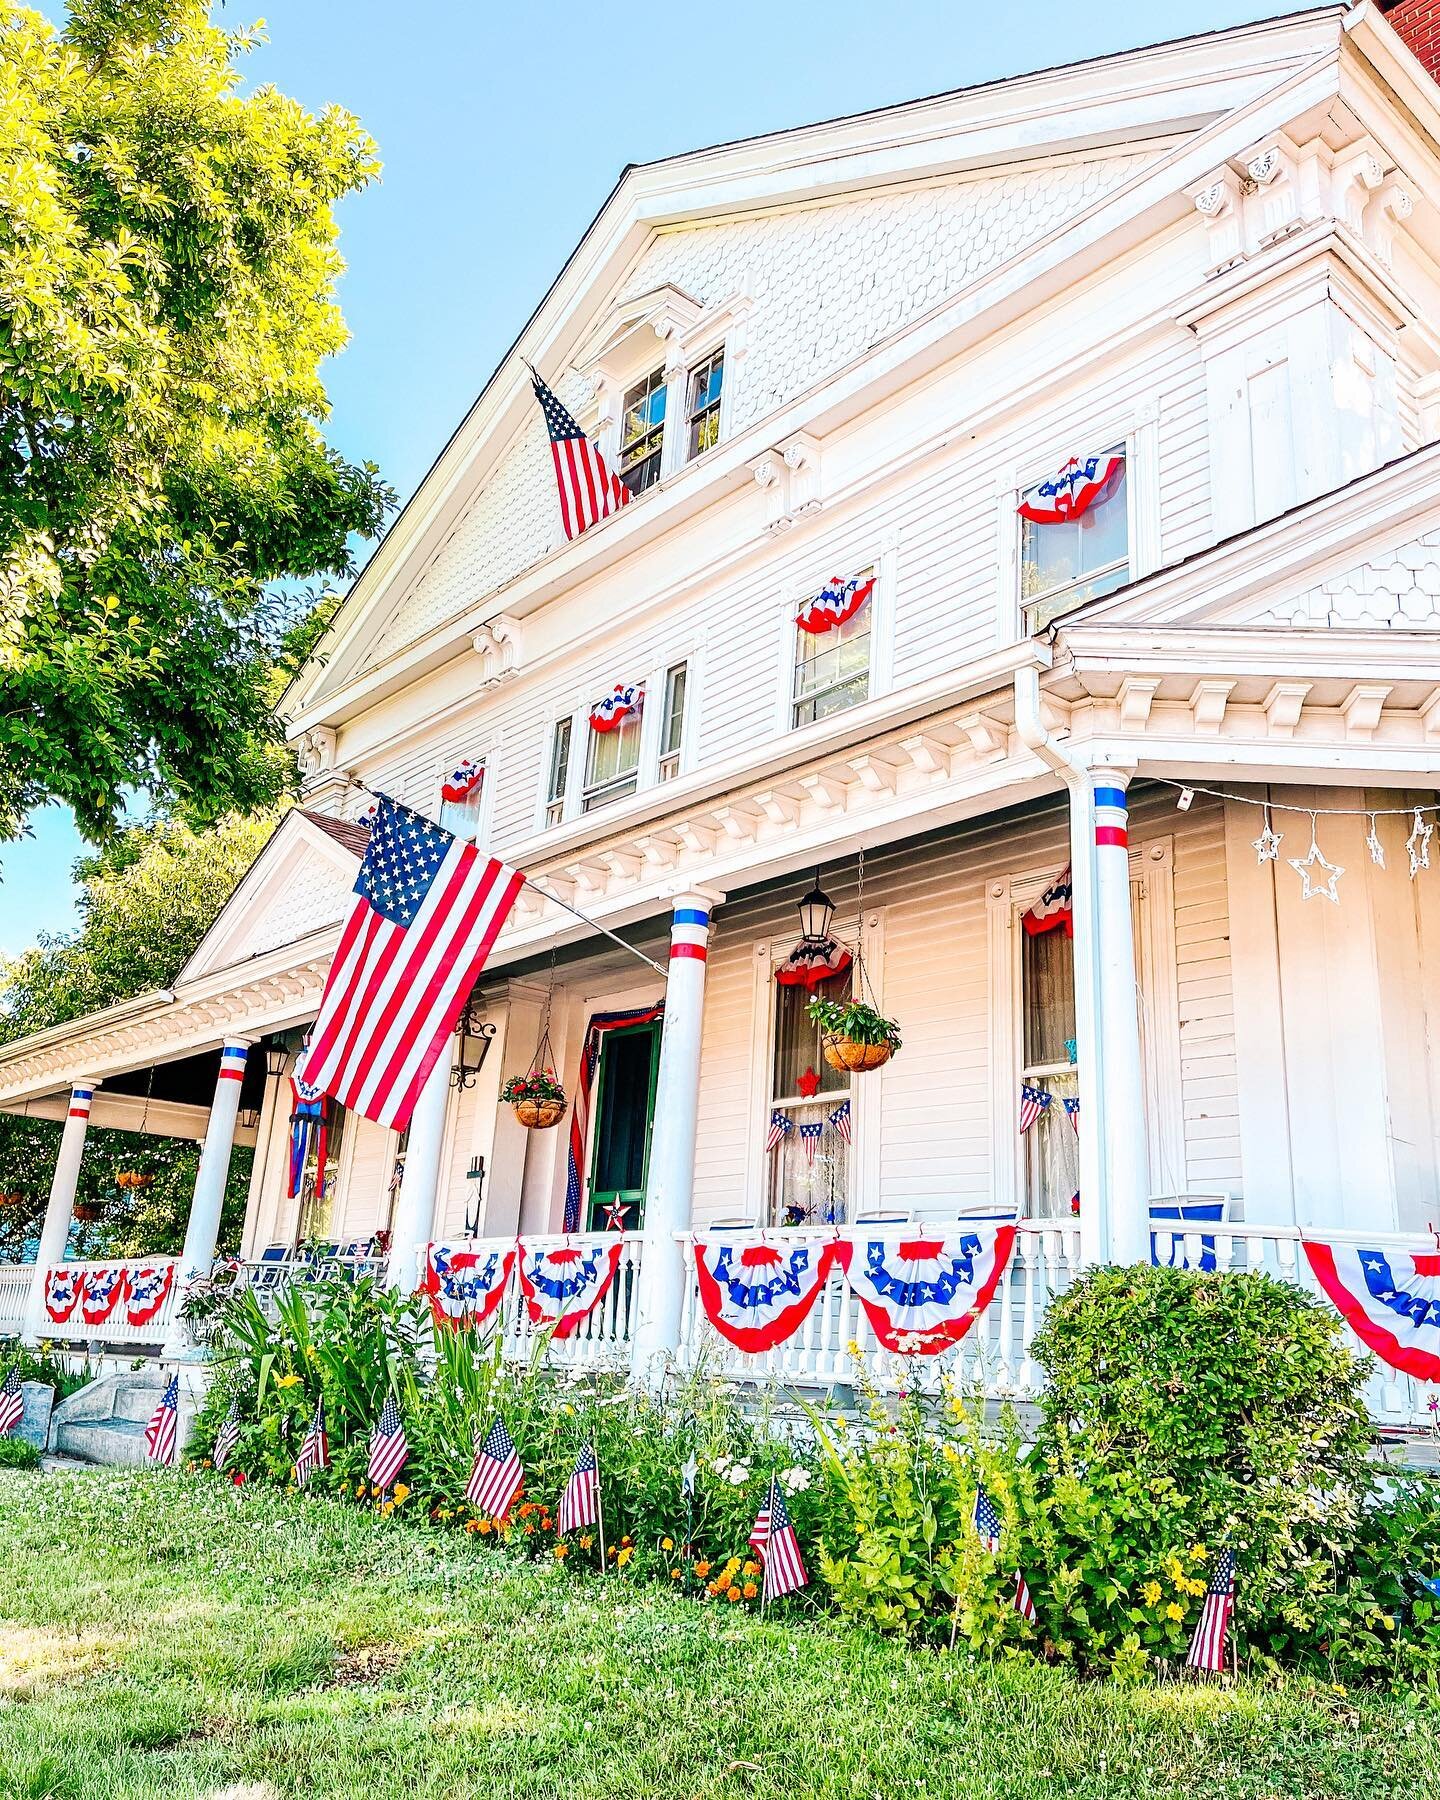 Now and then: bunting edition! We dress the house up every July to honor its historical roots. 🇺🇸
&bull;
&bull;
&bull;
#bedandbreakfast #airbnb #bnb #colchester #connecticut #ct #newengland #newenglandcharm #historichouse #historicpreservation #his